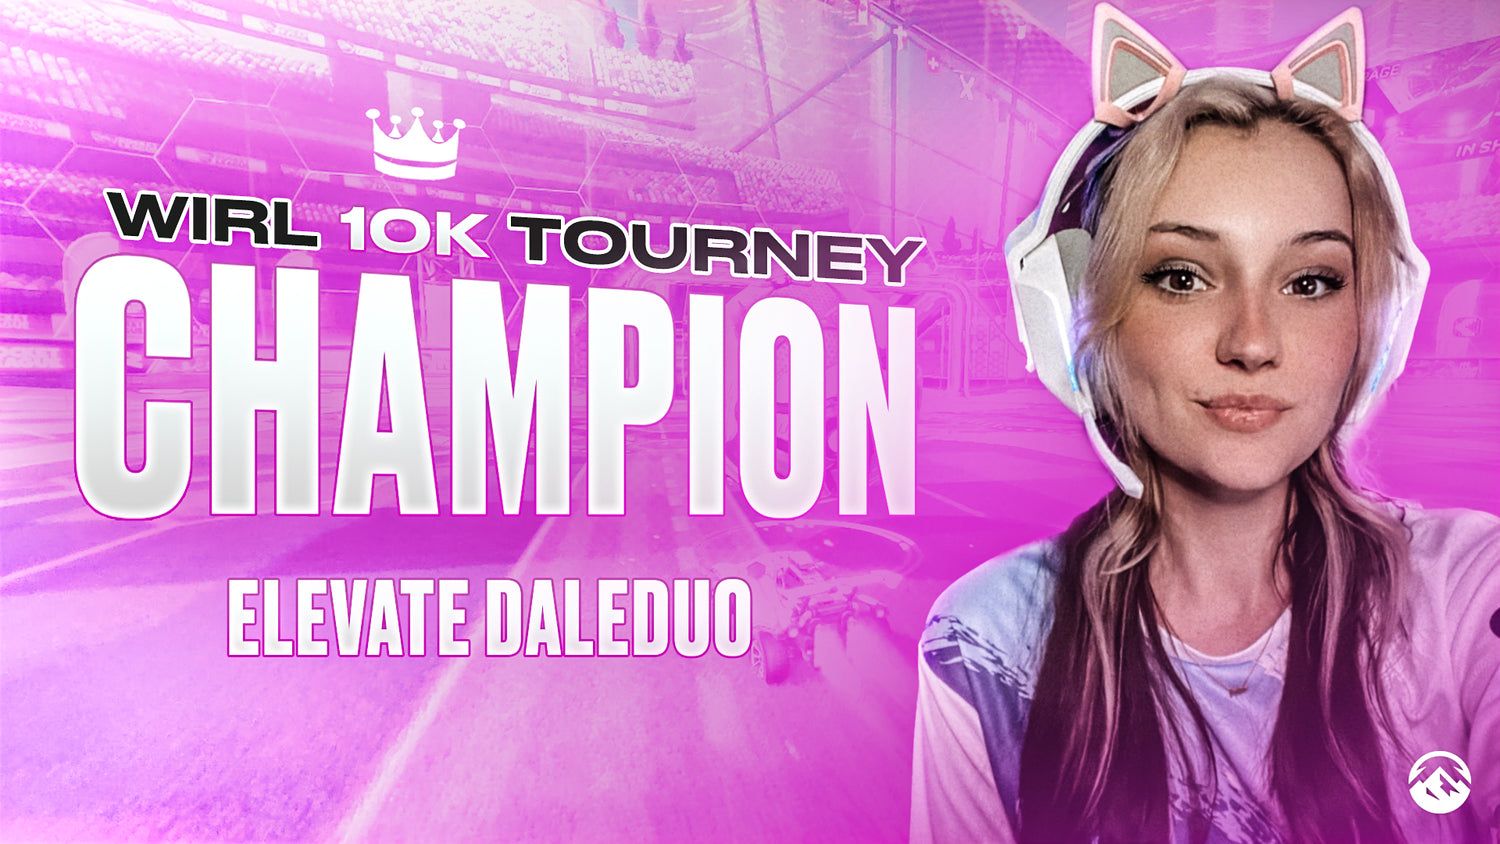 Elevate Content Creator DaleDuo Celebrates Women’s History Month with a Huge Win!